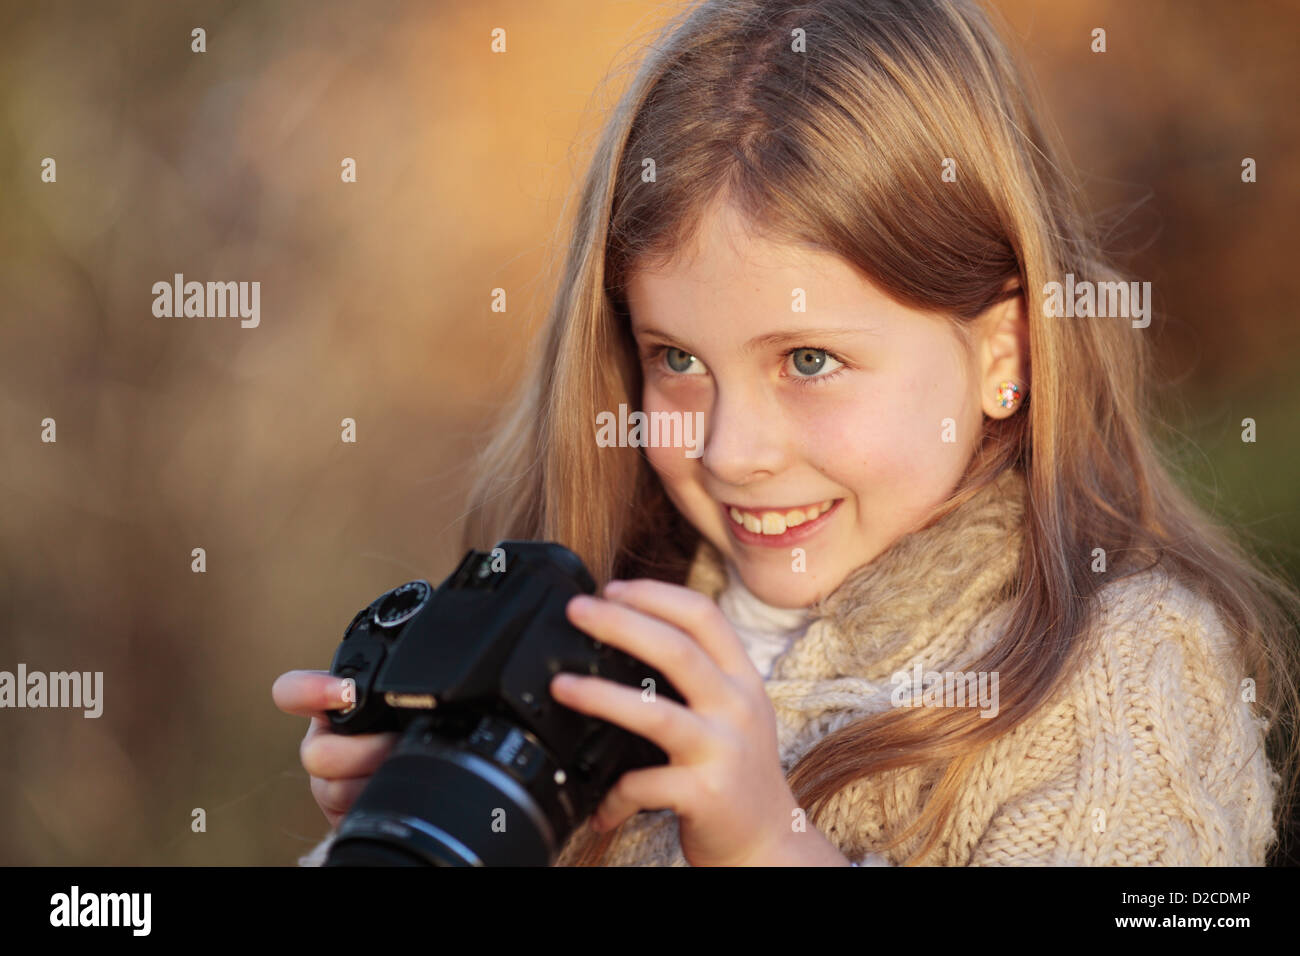 Young girl having fun with a camera. Stock Photo